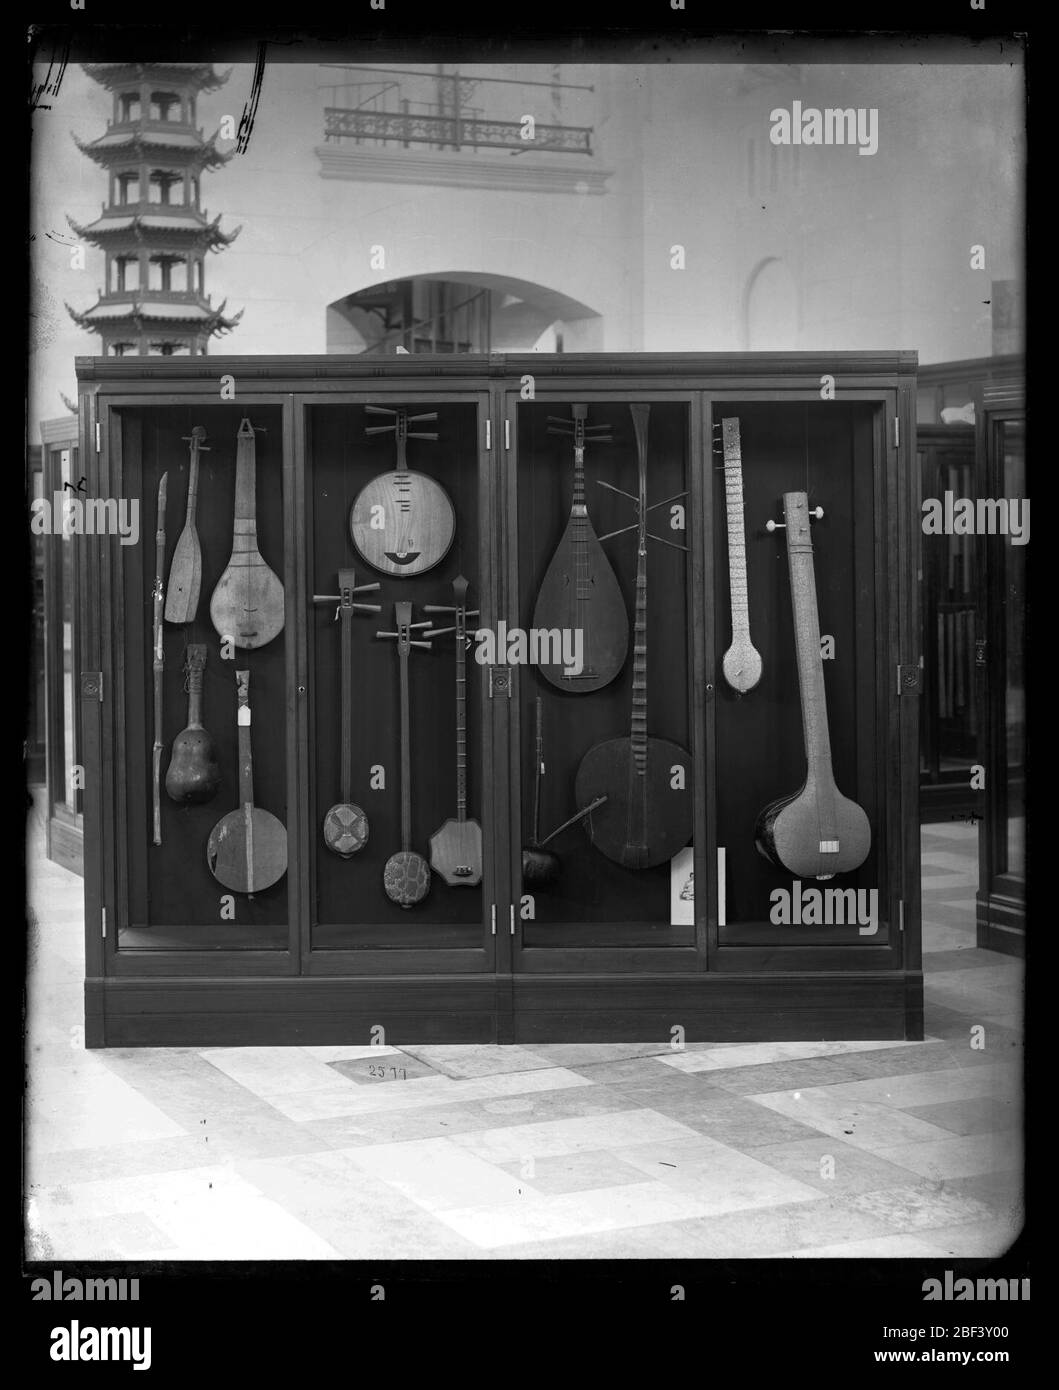 Musical Instruments Exhibit. Exhibit case featuring musical instruments in the United States National Museum, now known as the Arts and Industries Building.Smithsonian Institution Archives, Acc. 11-007, Box 011, Image No. Stock Photo